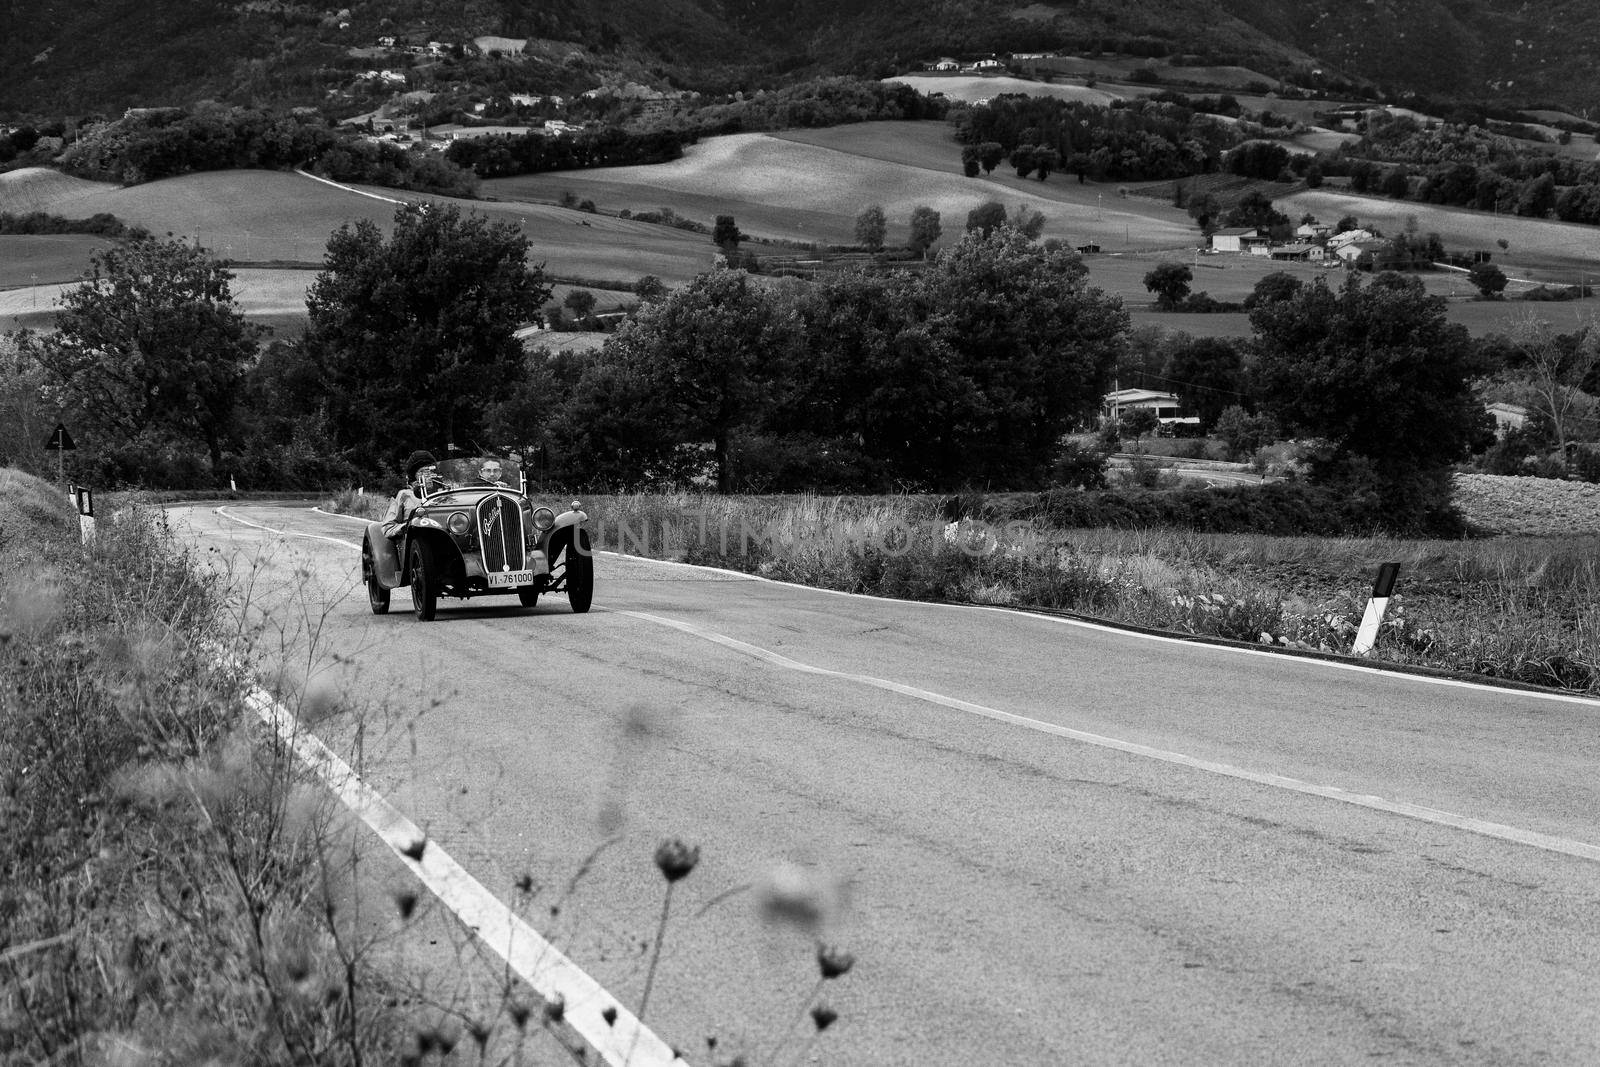 FIAT 508 S BALILLA SPORT COPPA ORO 1933 on an old racing car in rally Mille Miglia 2020 the famous italian historical race (1927-1957) by massimocampanari